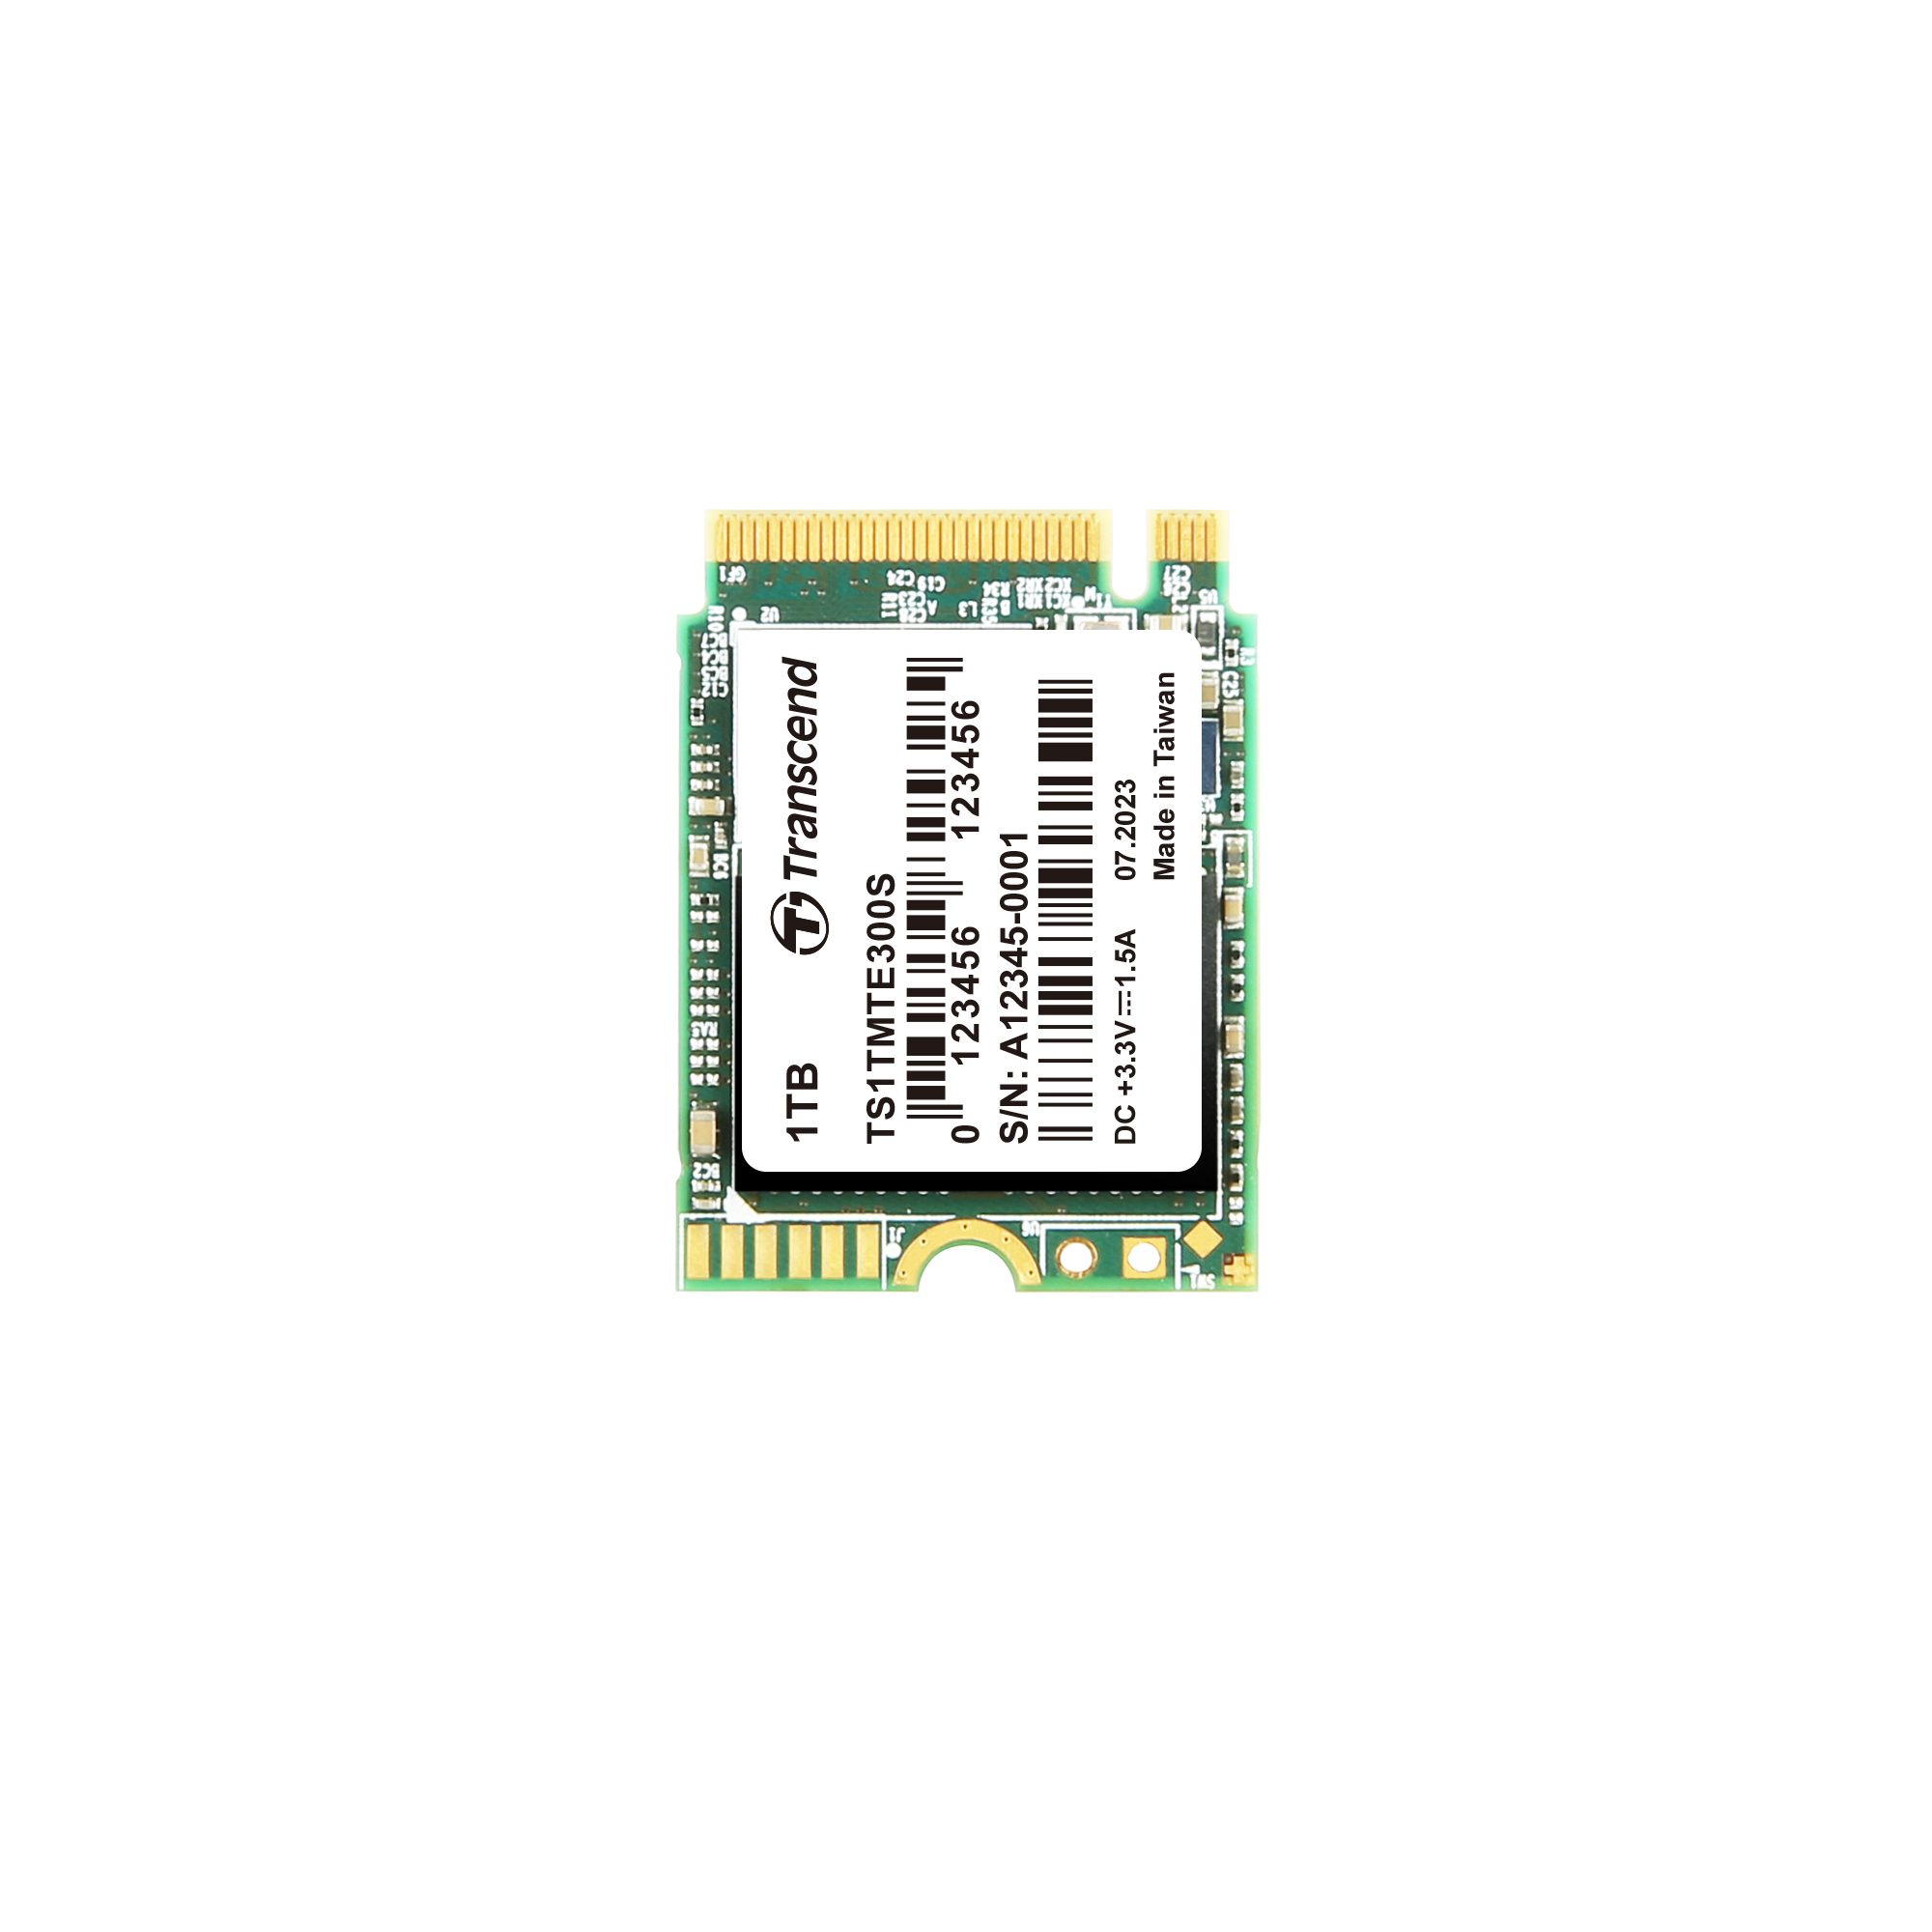 Transcend MTE300S 1TB, TS1TMTE300S Transcend MTE300S 1TB SSD disk M.2 2230,NVMe PCIe Gen3 x4 (3D NAND flash), R2000 MB/s, W1650 MB/s